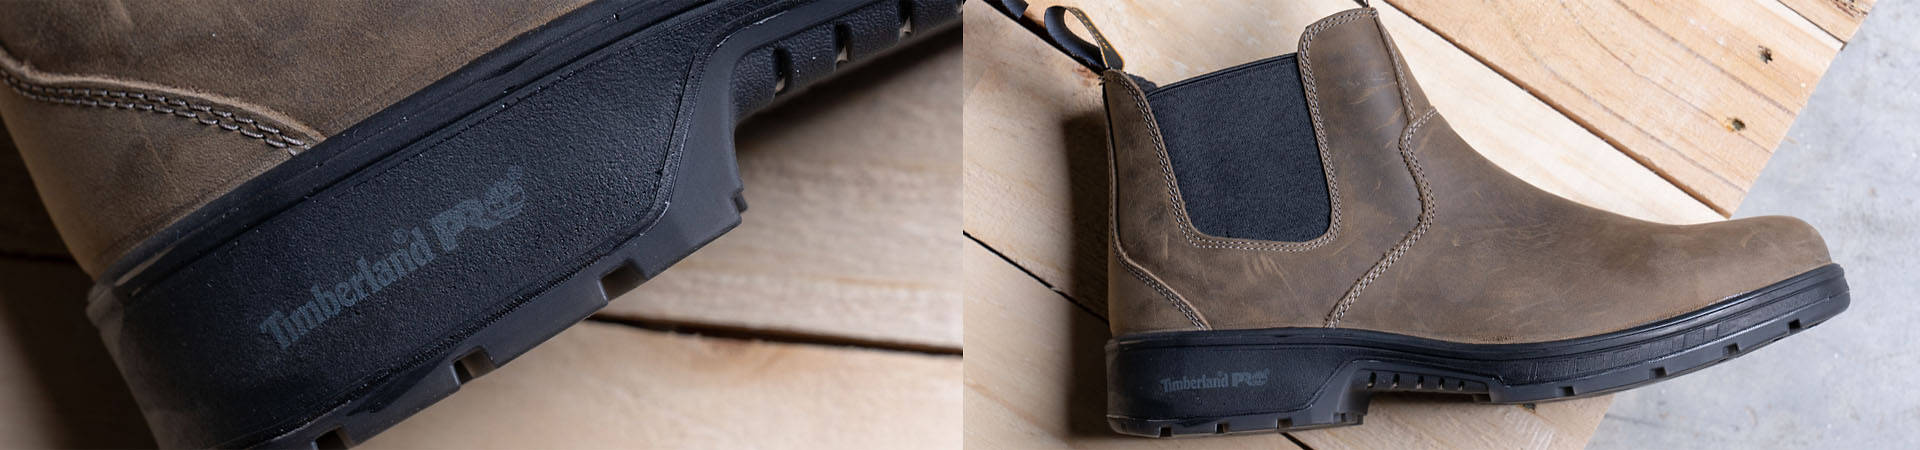 Image of a single pull-on low-top brown work boot on its side on some wooden boards; boot features pull tabs and stretchy black goring panels.